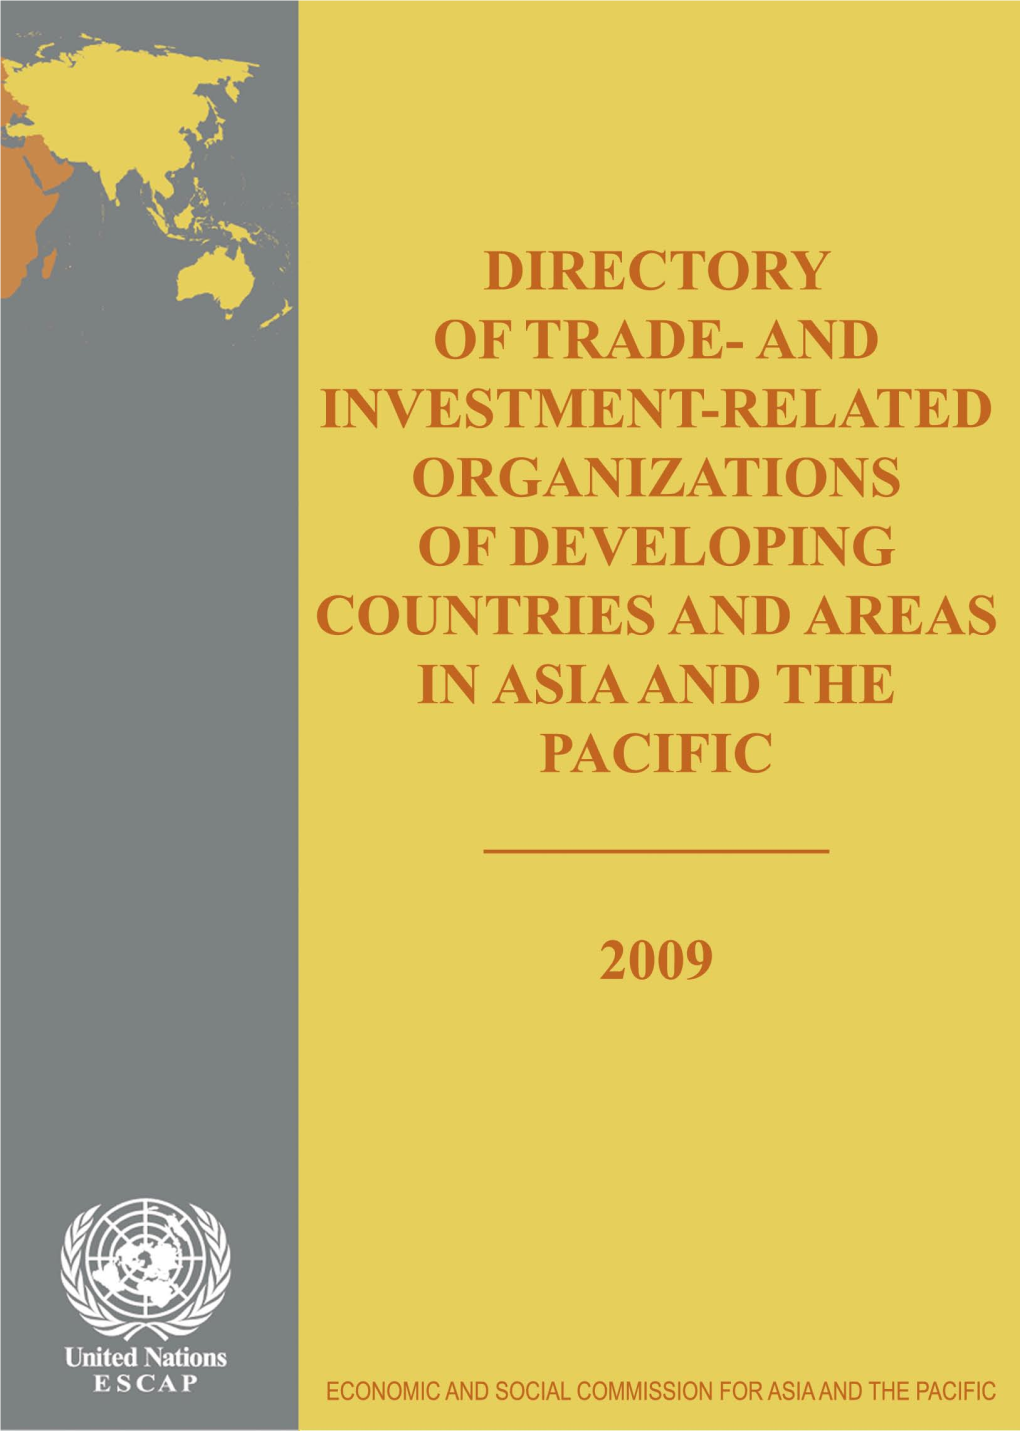 And Investment-Related Organizations of Developing Countries and Areas in Asia and the Pacific